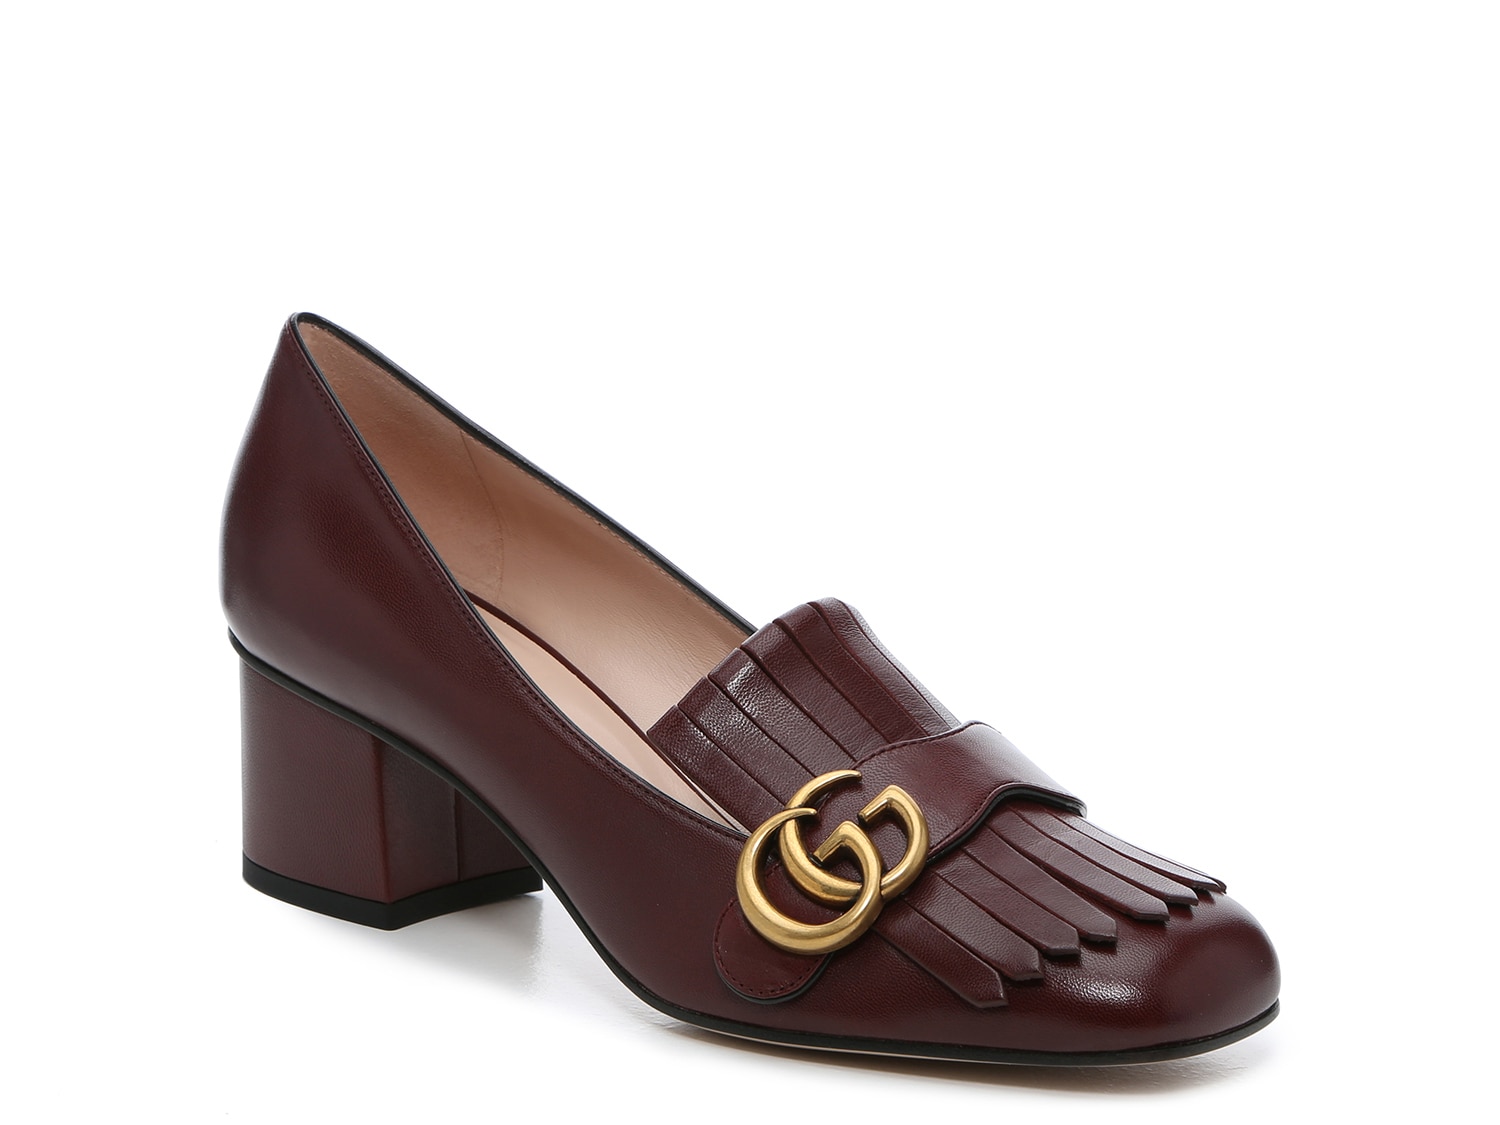 Gucci Marmont 55 Pump - Free Shipping | DSW